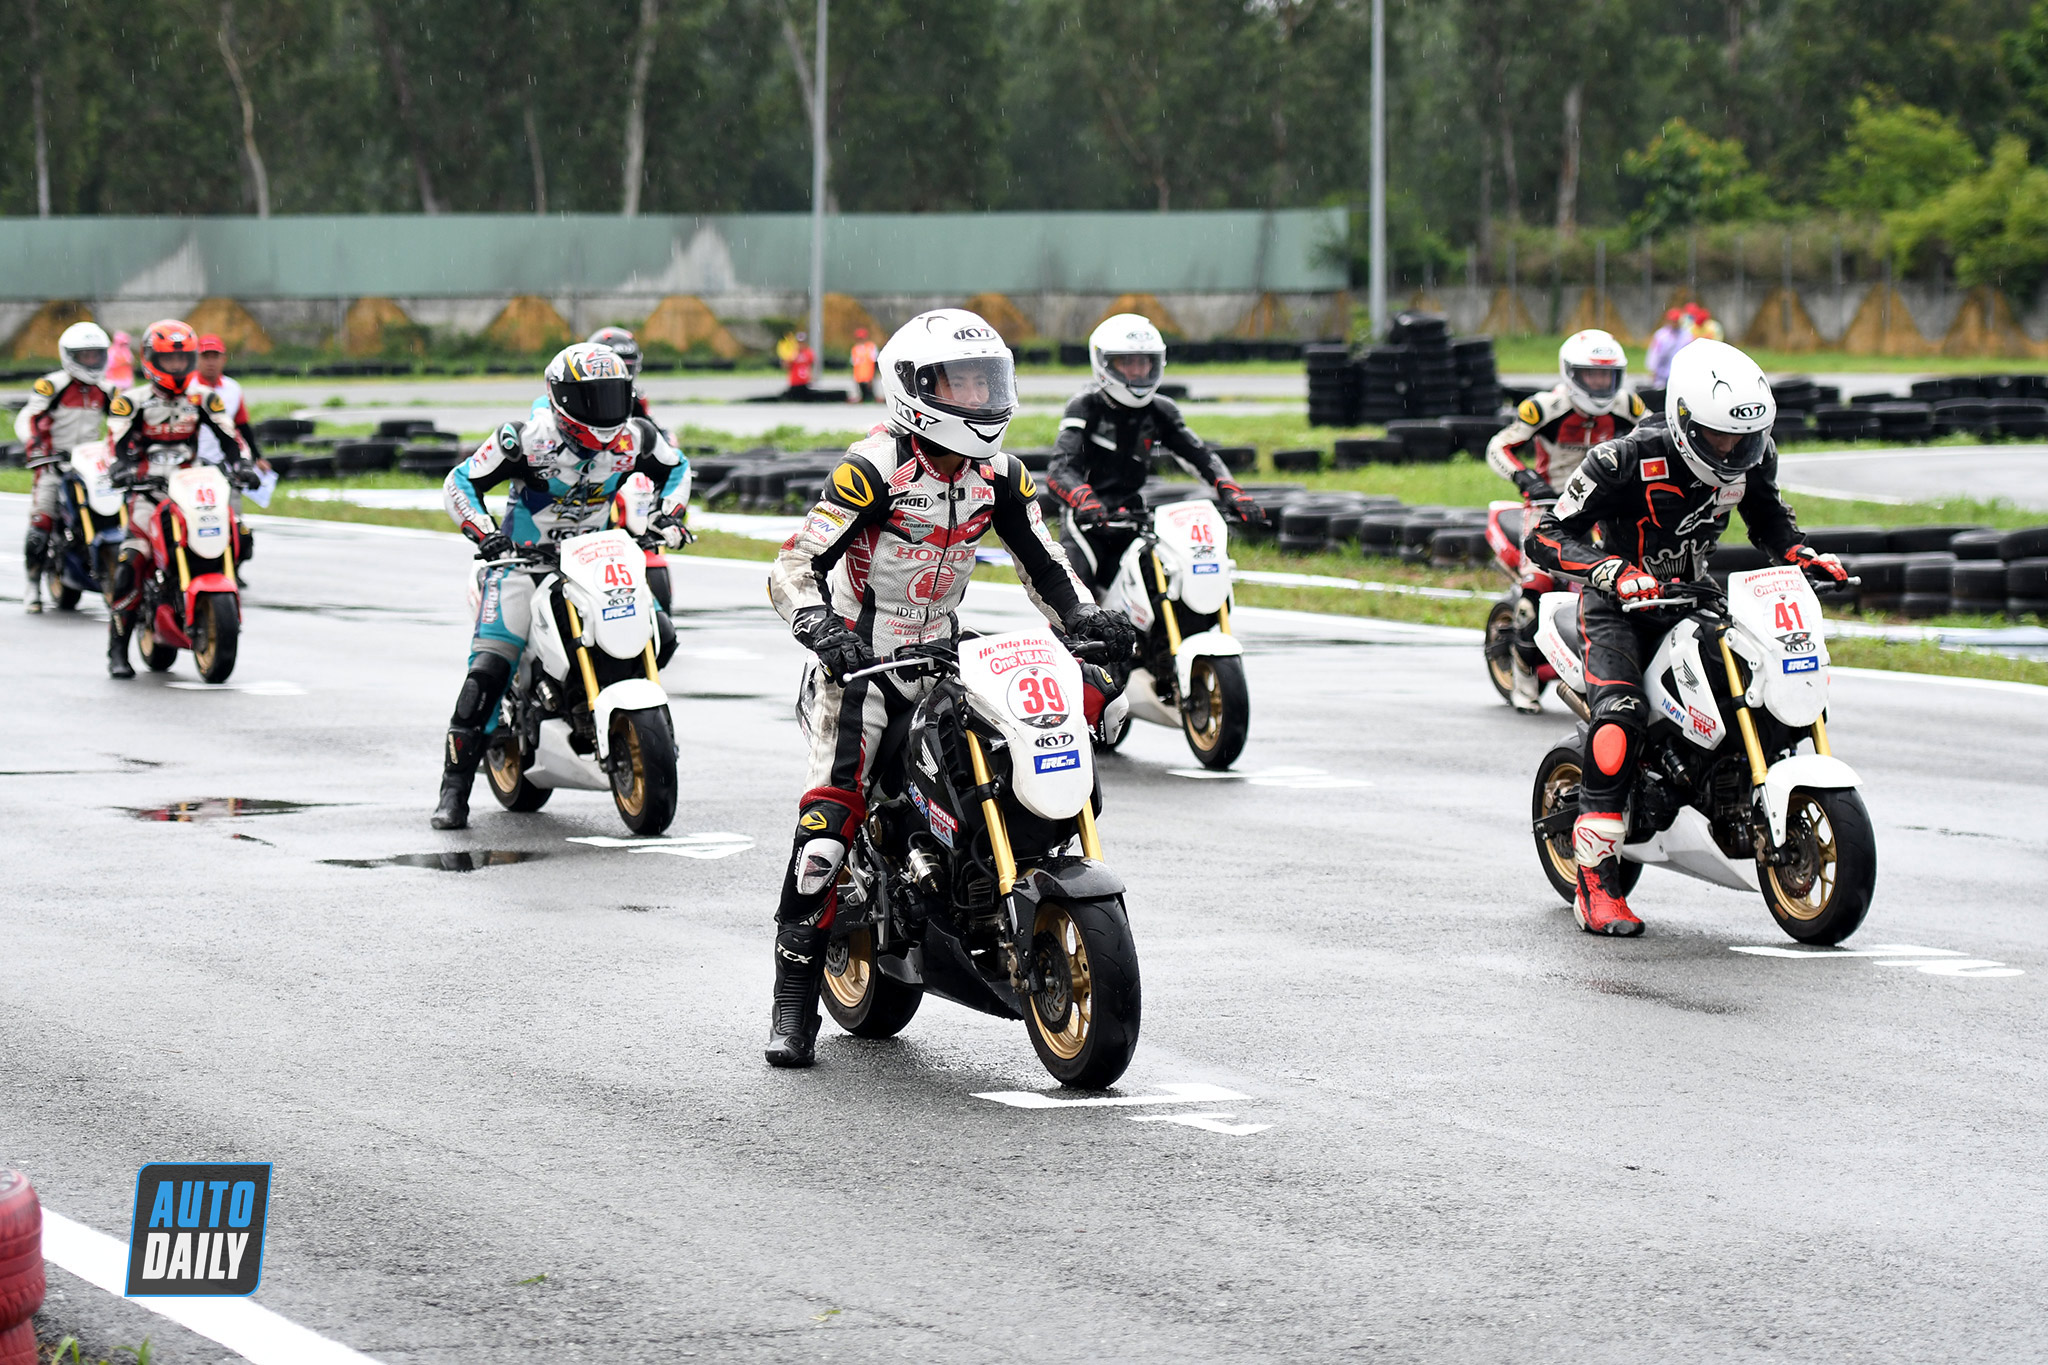 Outstanding riders competing in the MSX 125cc category at VMRC 2020 vmrc-2020-round1-autodaily-017.jpg